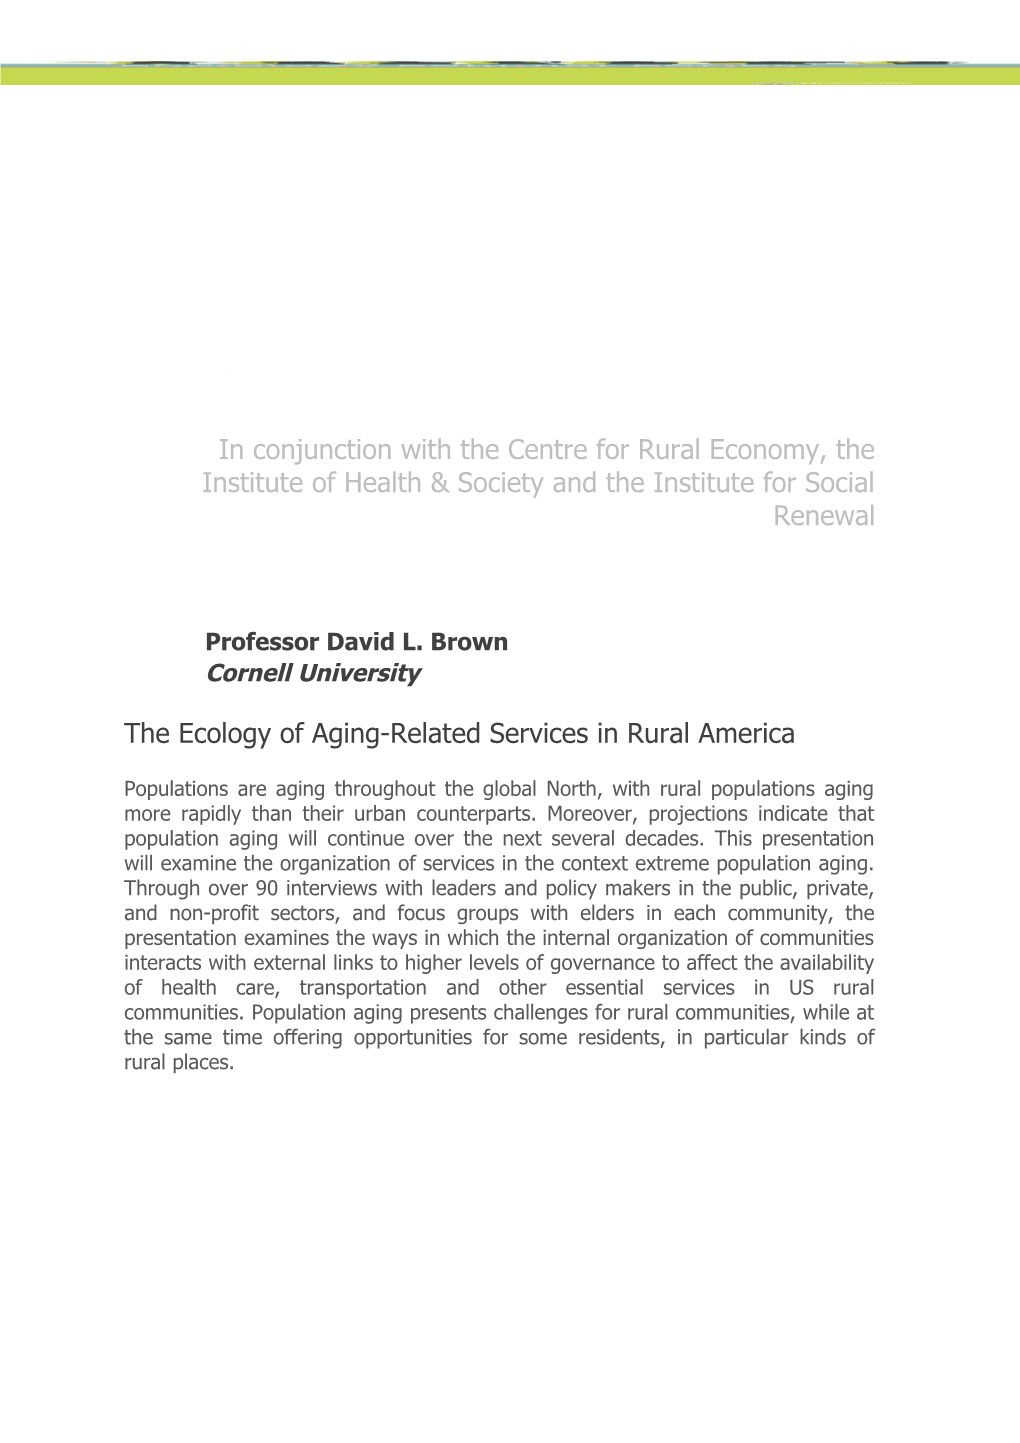 The Ecology of Aging-Related Services in Rural America